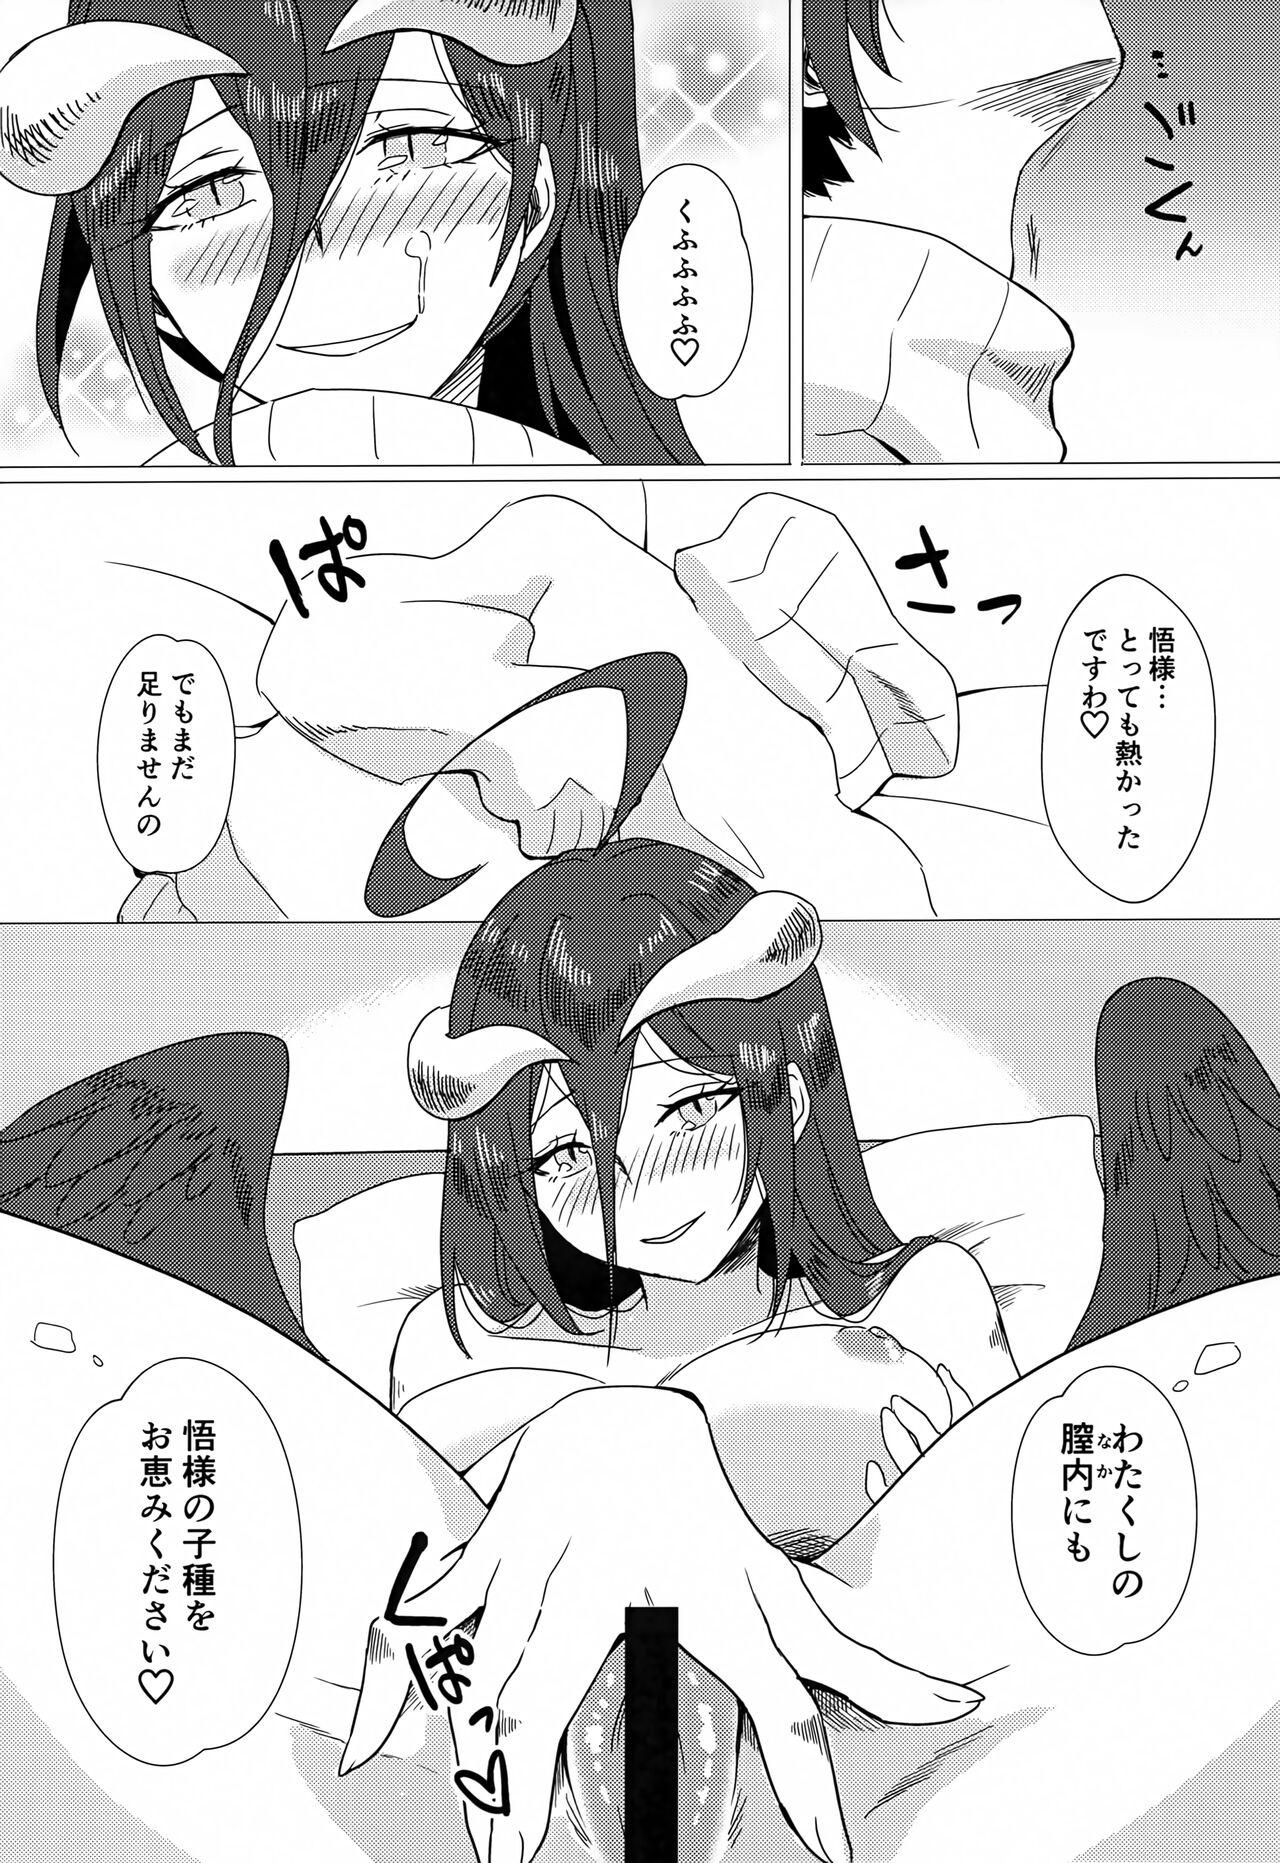 Strap On Albedo-san to! 2 - Overlord Long Hair - Page 12